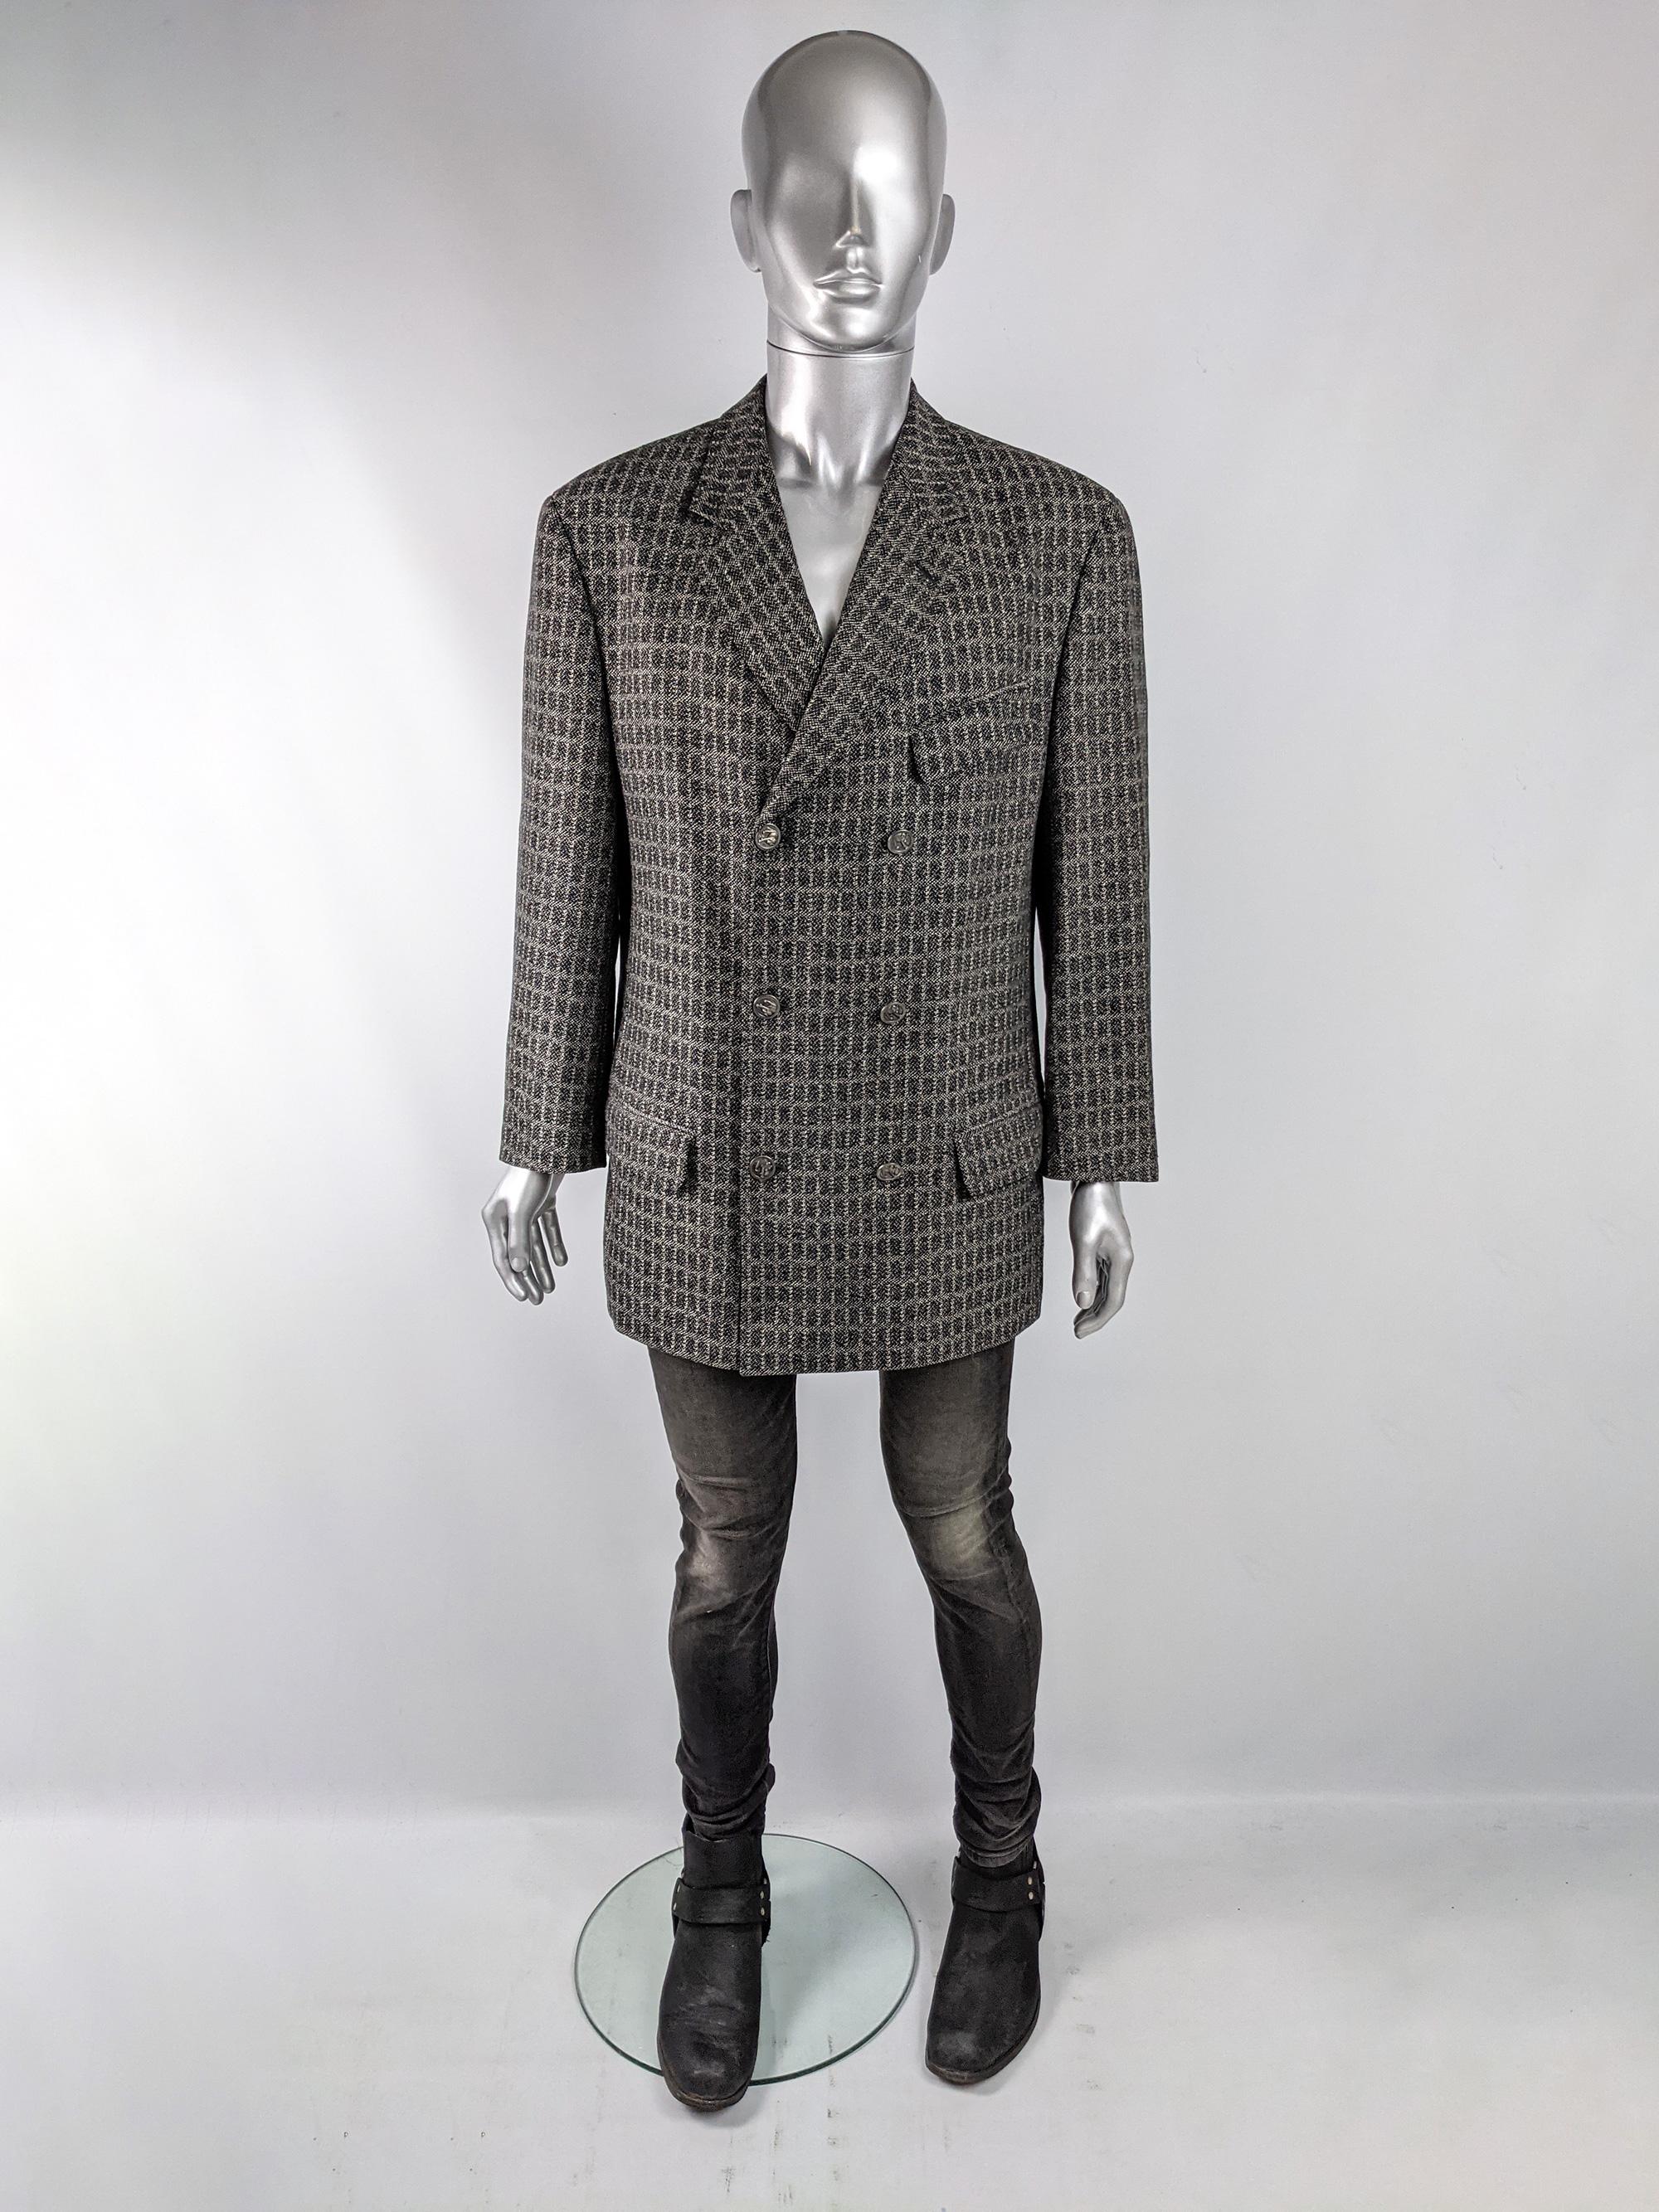 A stylish vintage mens Versus by Gianni Versace blazer / sport coat from the 90s in a black and grey checked wool and mohair fabric with subtle multicolored flecks throughout. It is double breasted with the Versus logo moulded on the buttons.